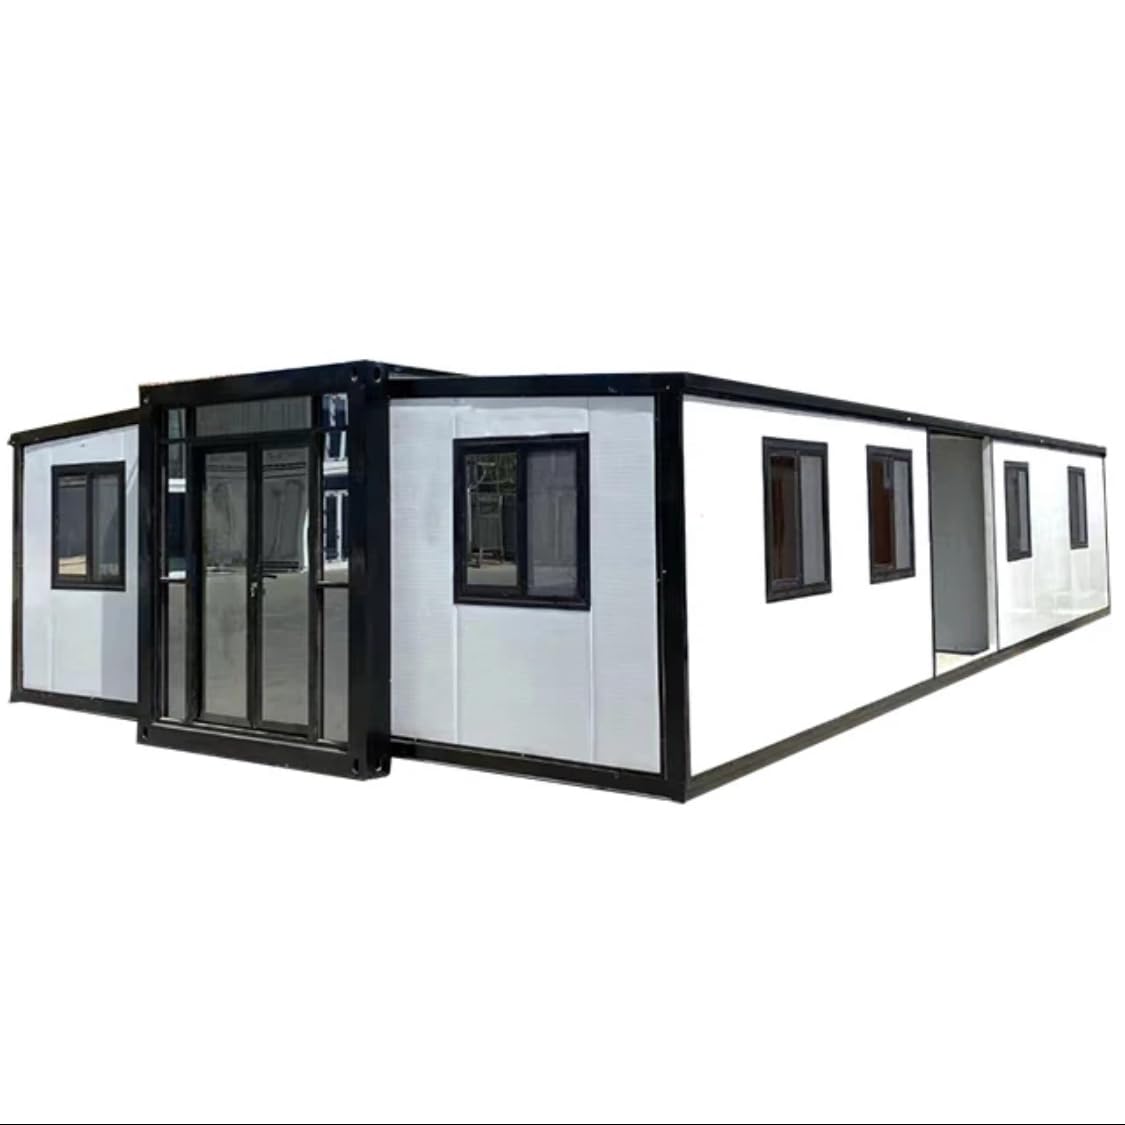 Portable Prefabricated Tiny Home 30x40ft, Mobile Expandable Plastic Prefab House for Hotel, Booth, Office, Guard House, Shop, Villa, Warehouse, Workshop.